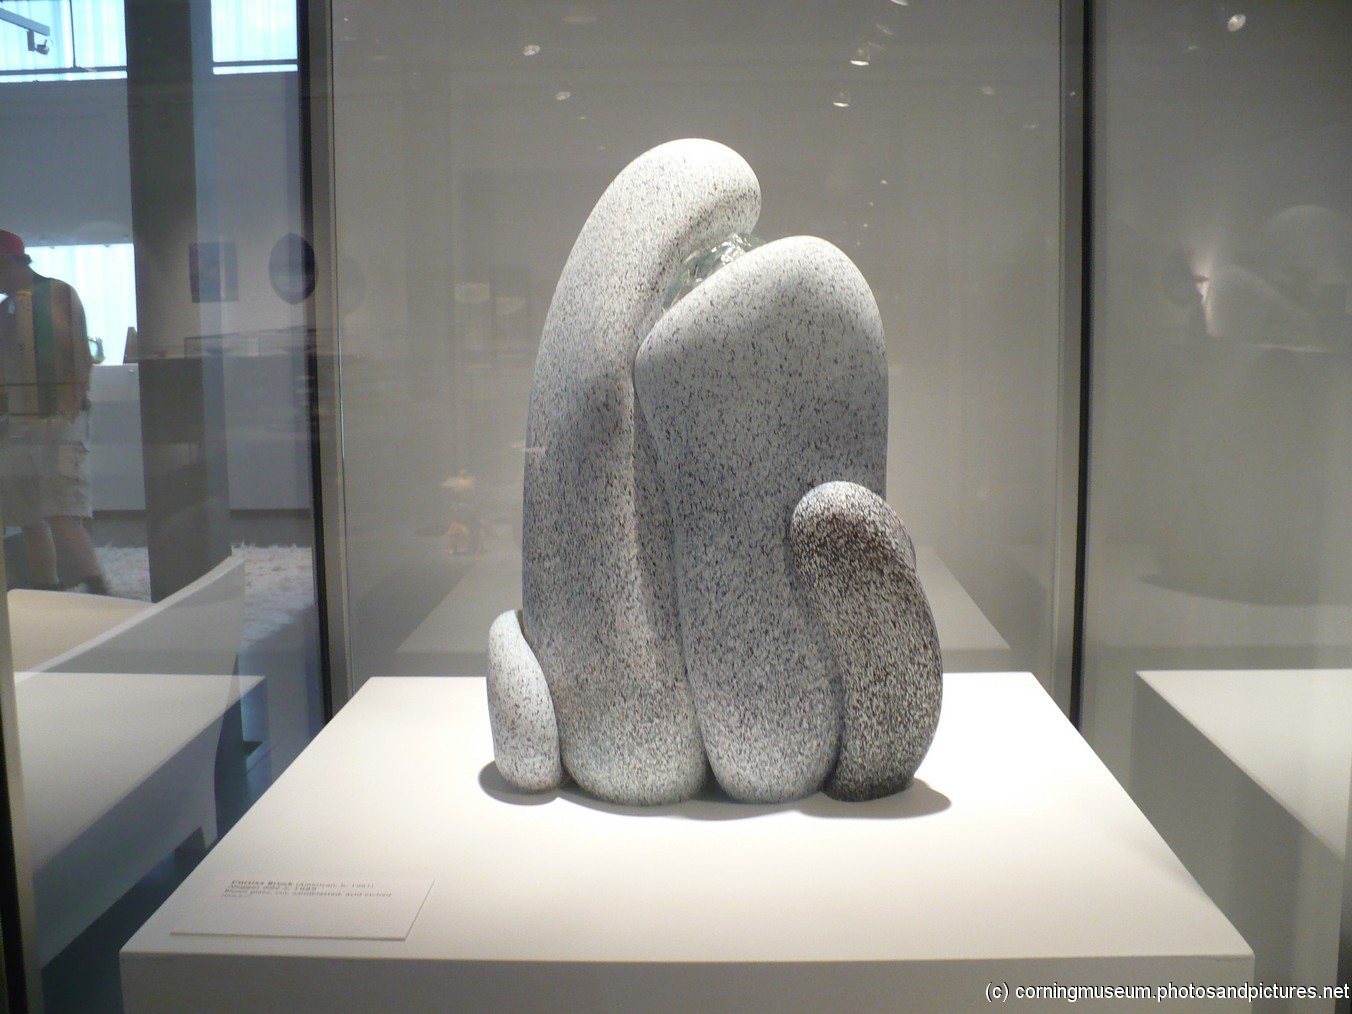 Granite and Glass sculpture at Corning Museum of Glass.jpg
